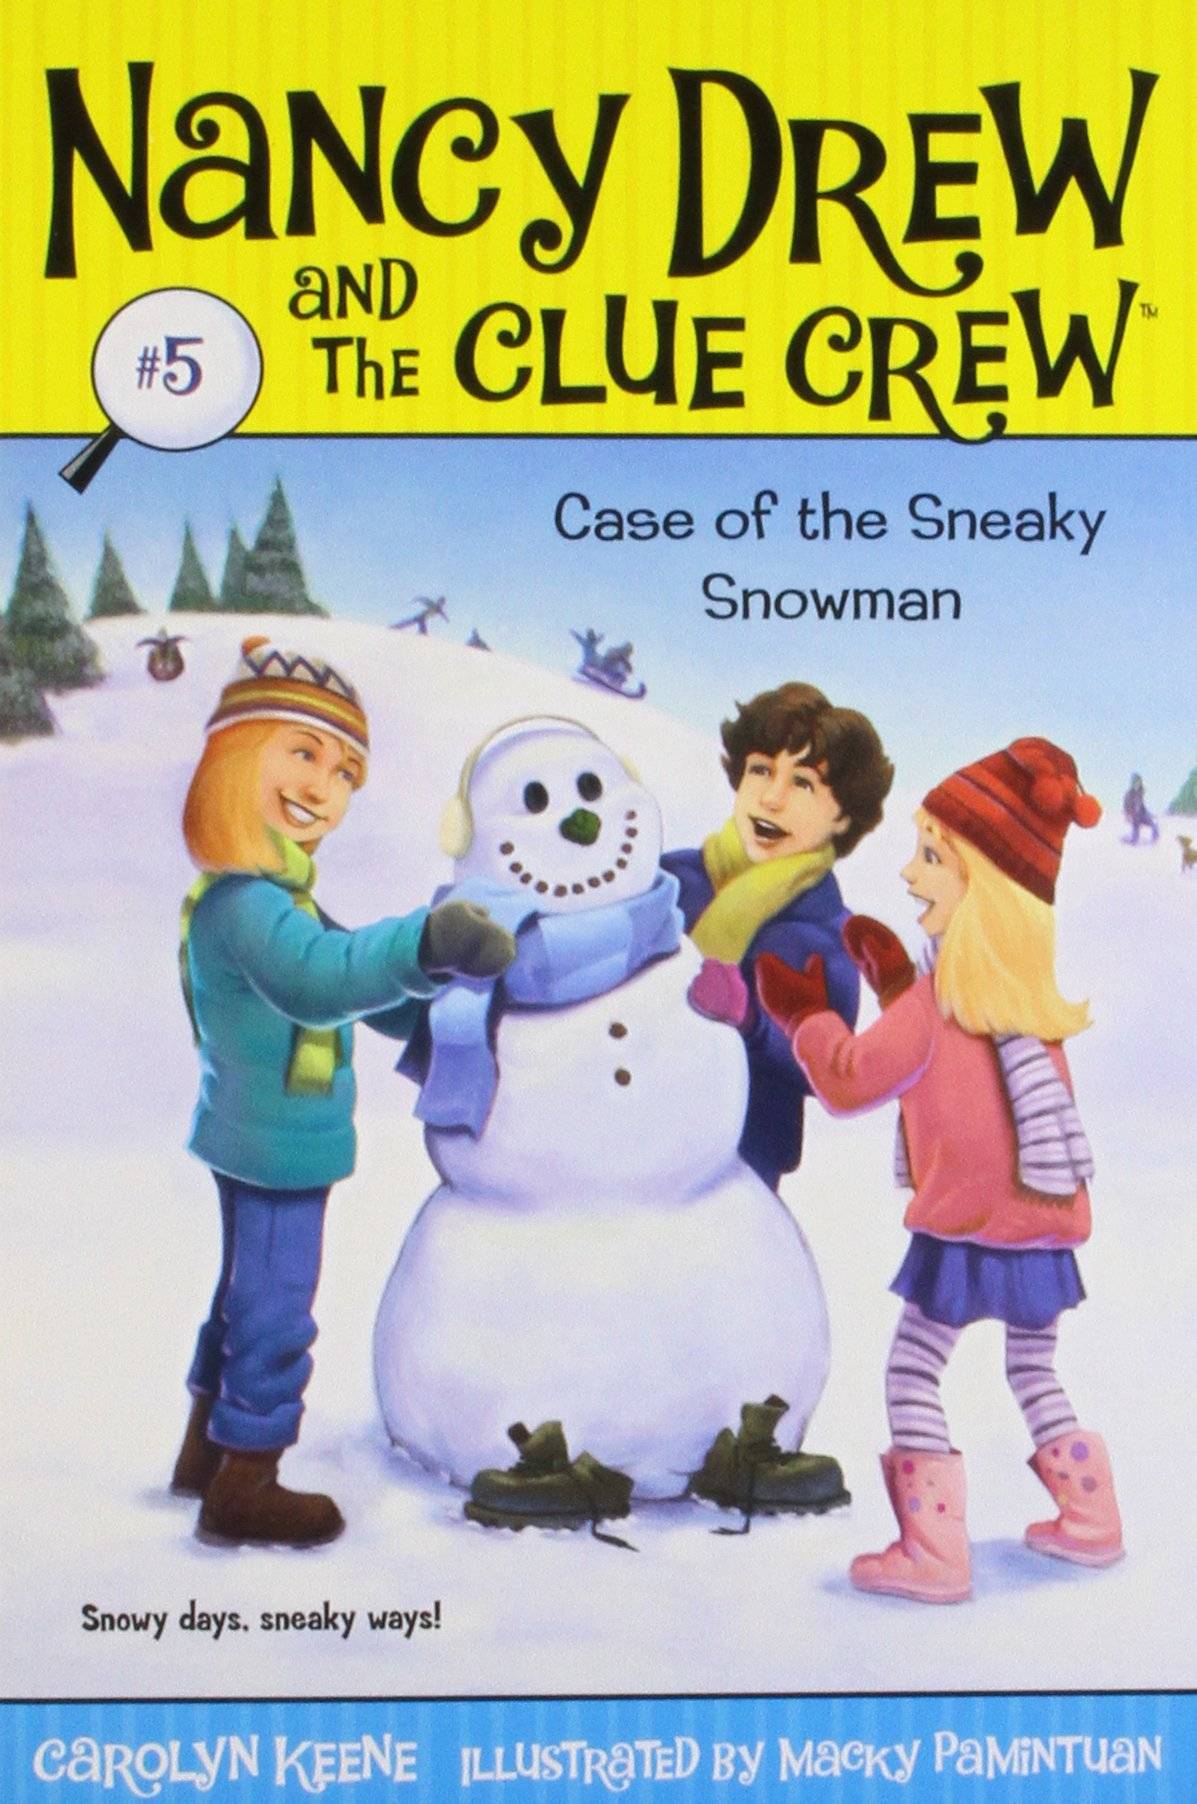 IMG : The Nancy Drew and the Clue Crew Case of the Sneaky Snowman #5